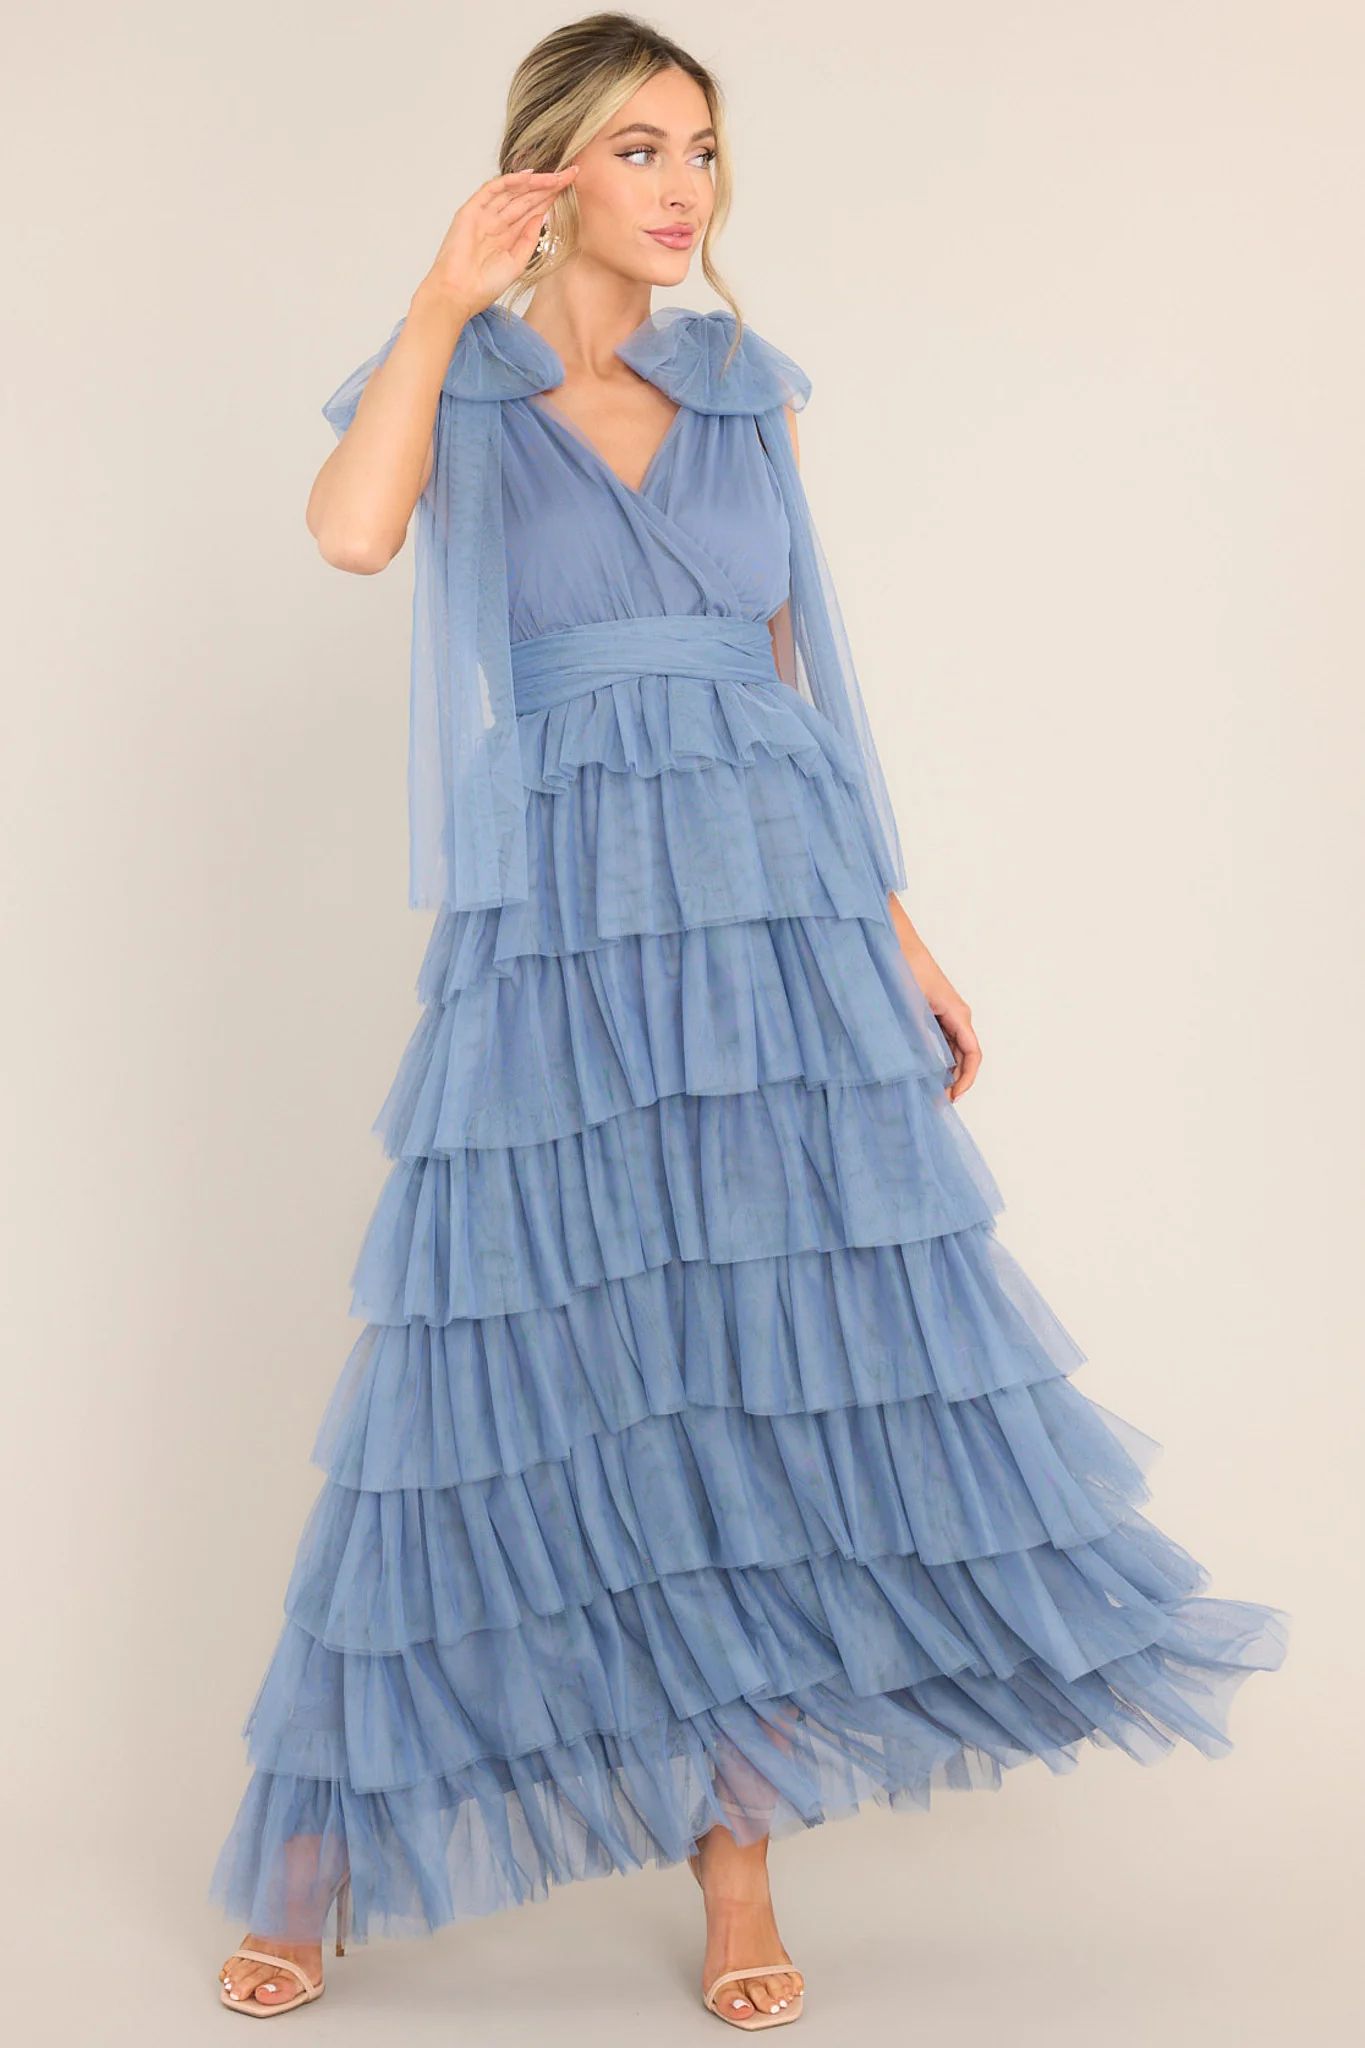 Creating Memories Ash Blue Tiered Tulle Maxi Dress | Red Dress